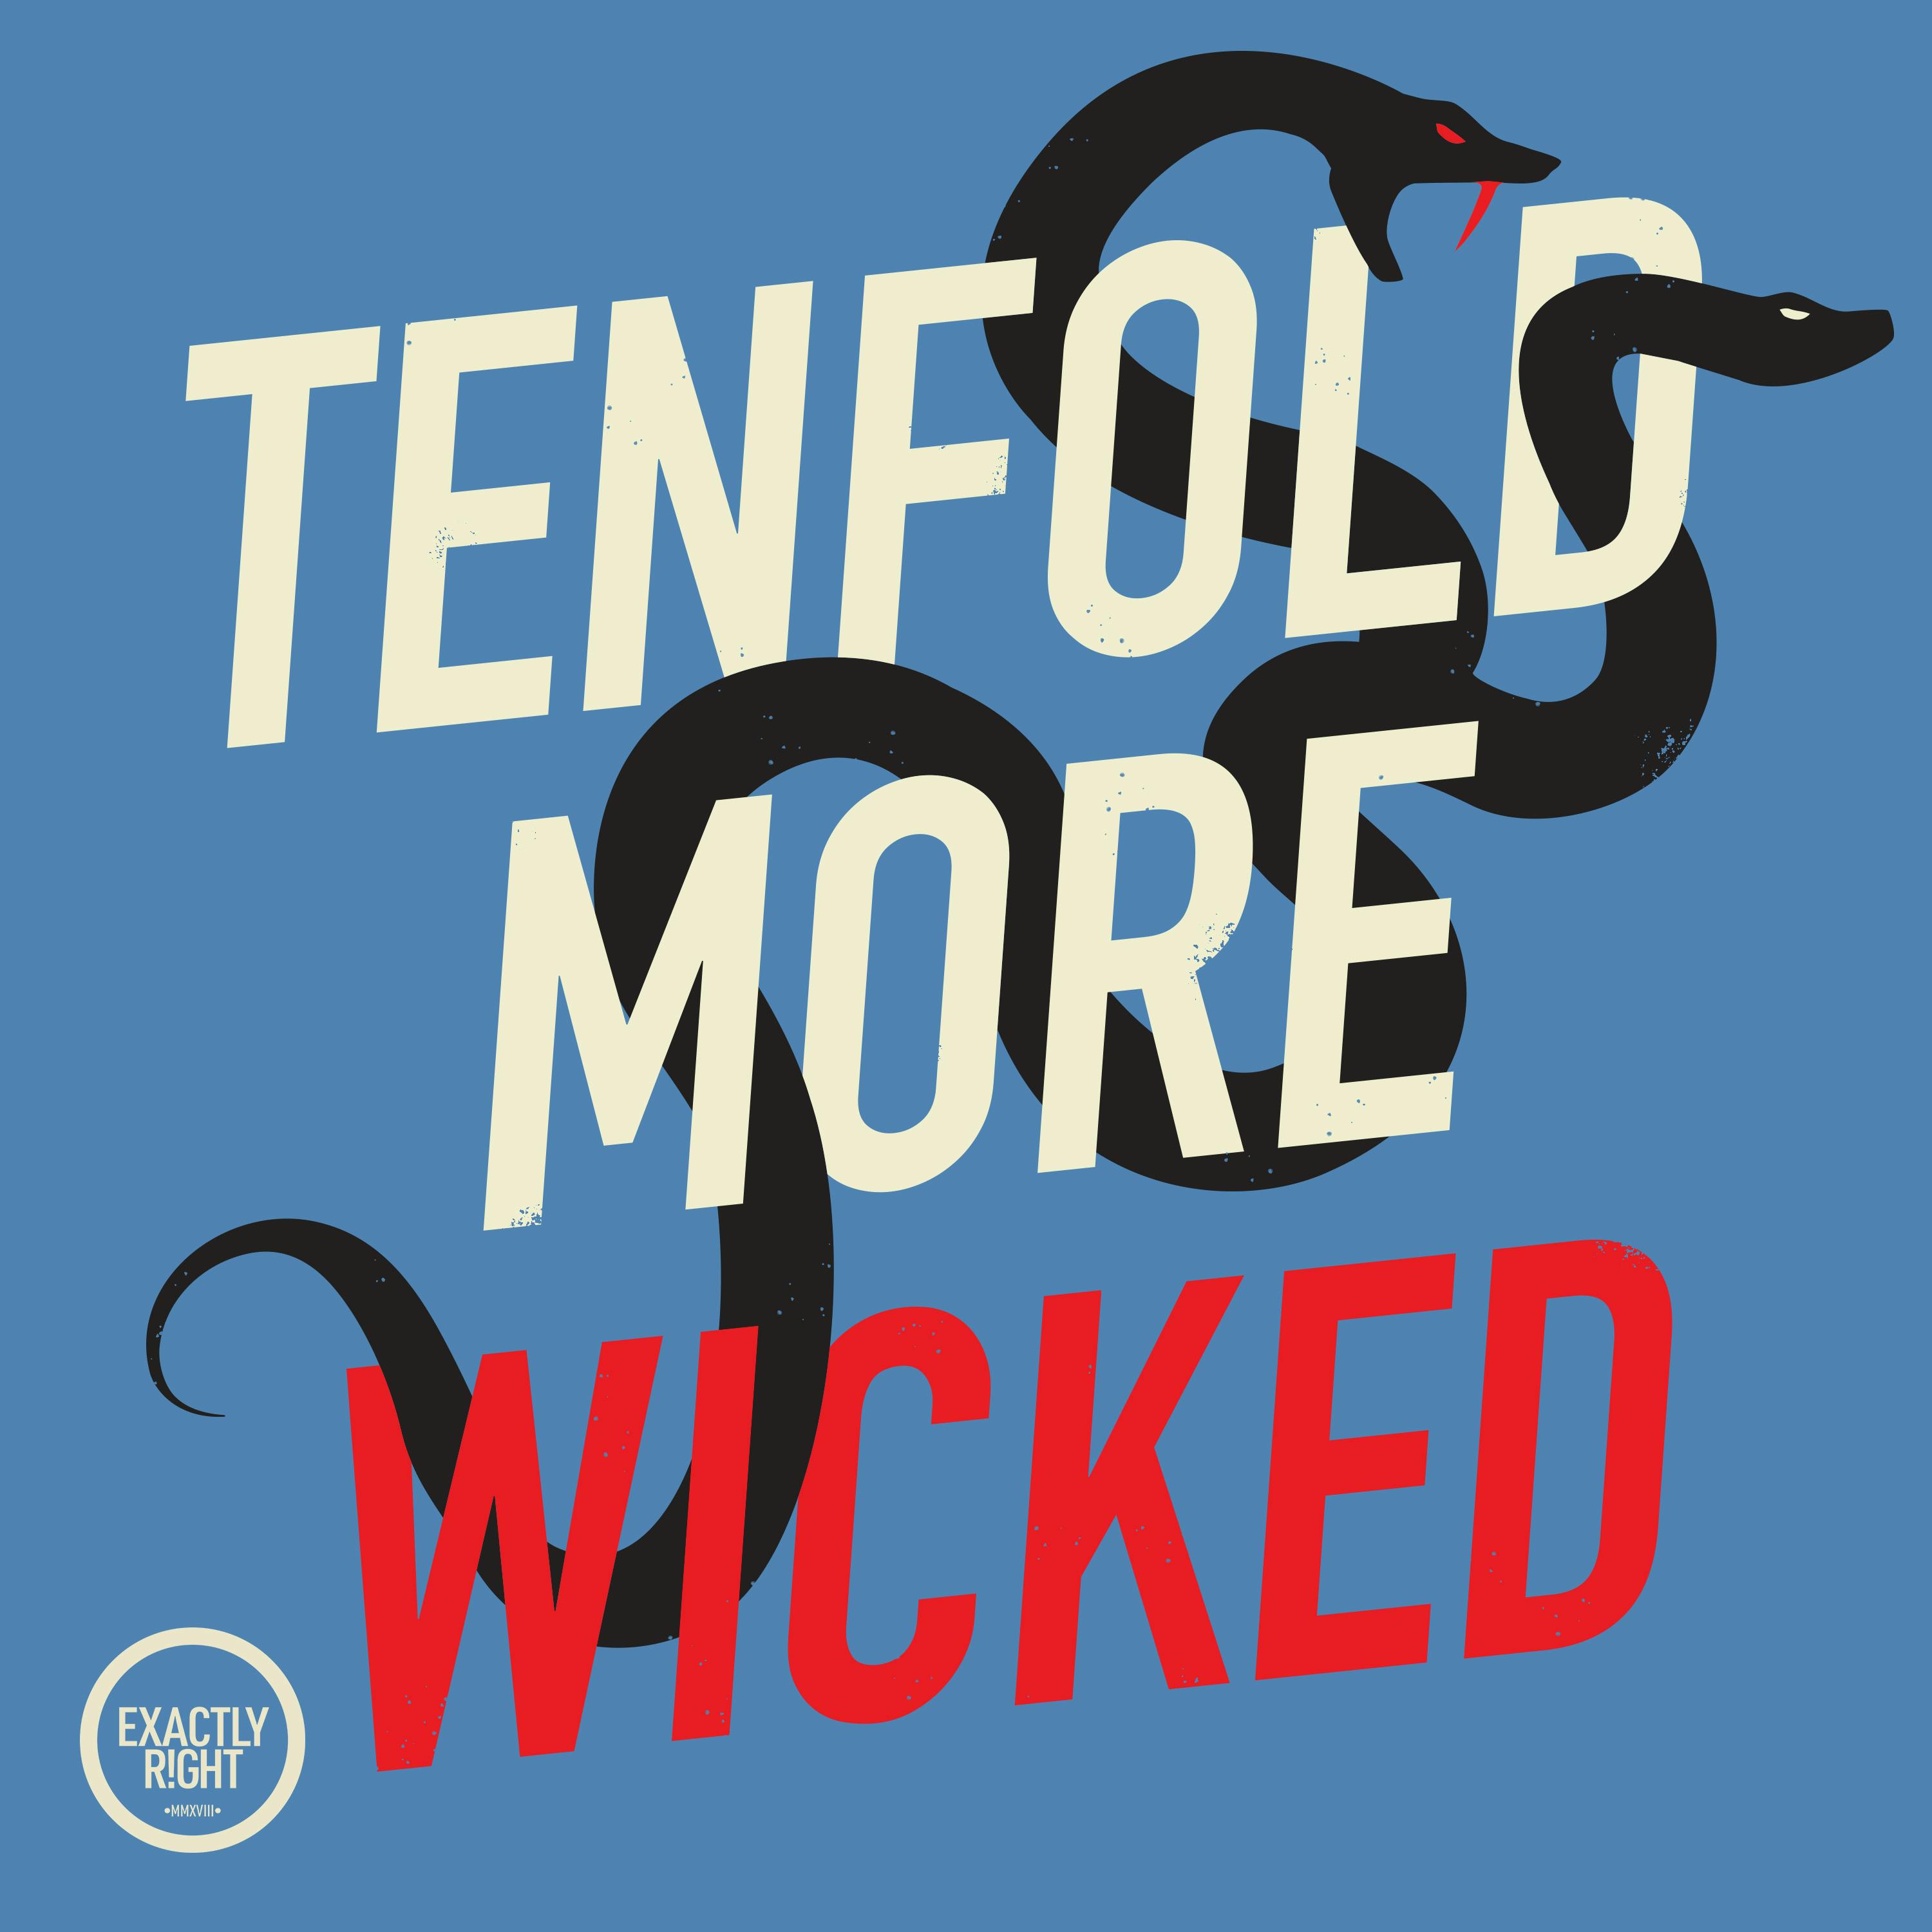 Tenfold More Wicked - Fire and Brimstone: A Cold Winter